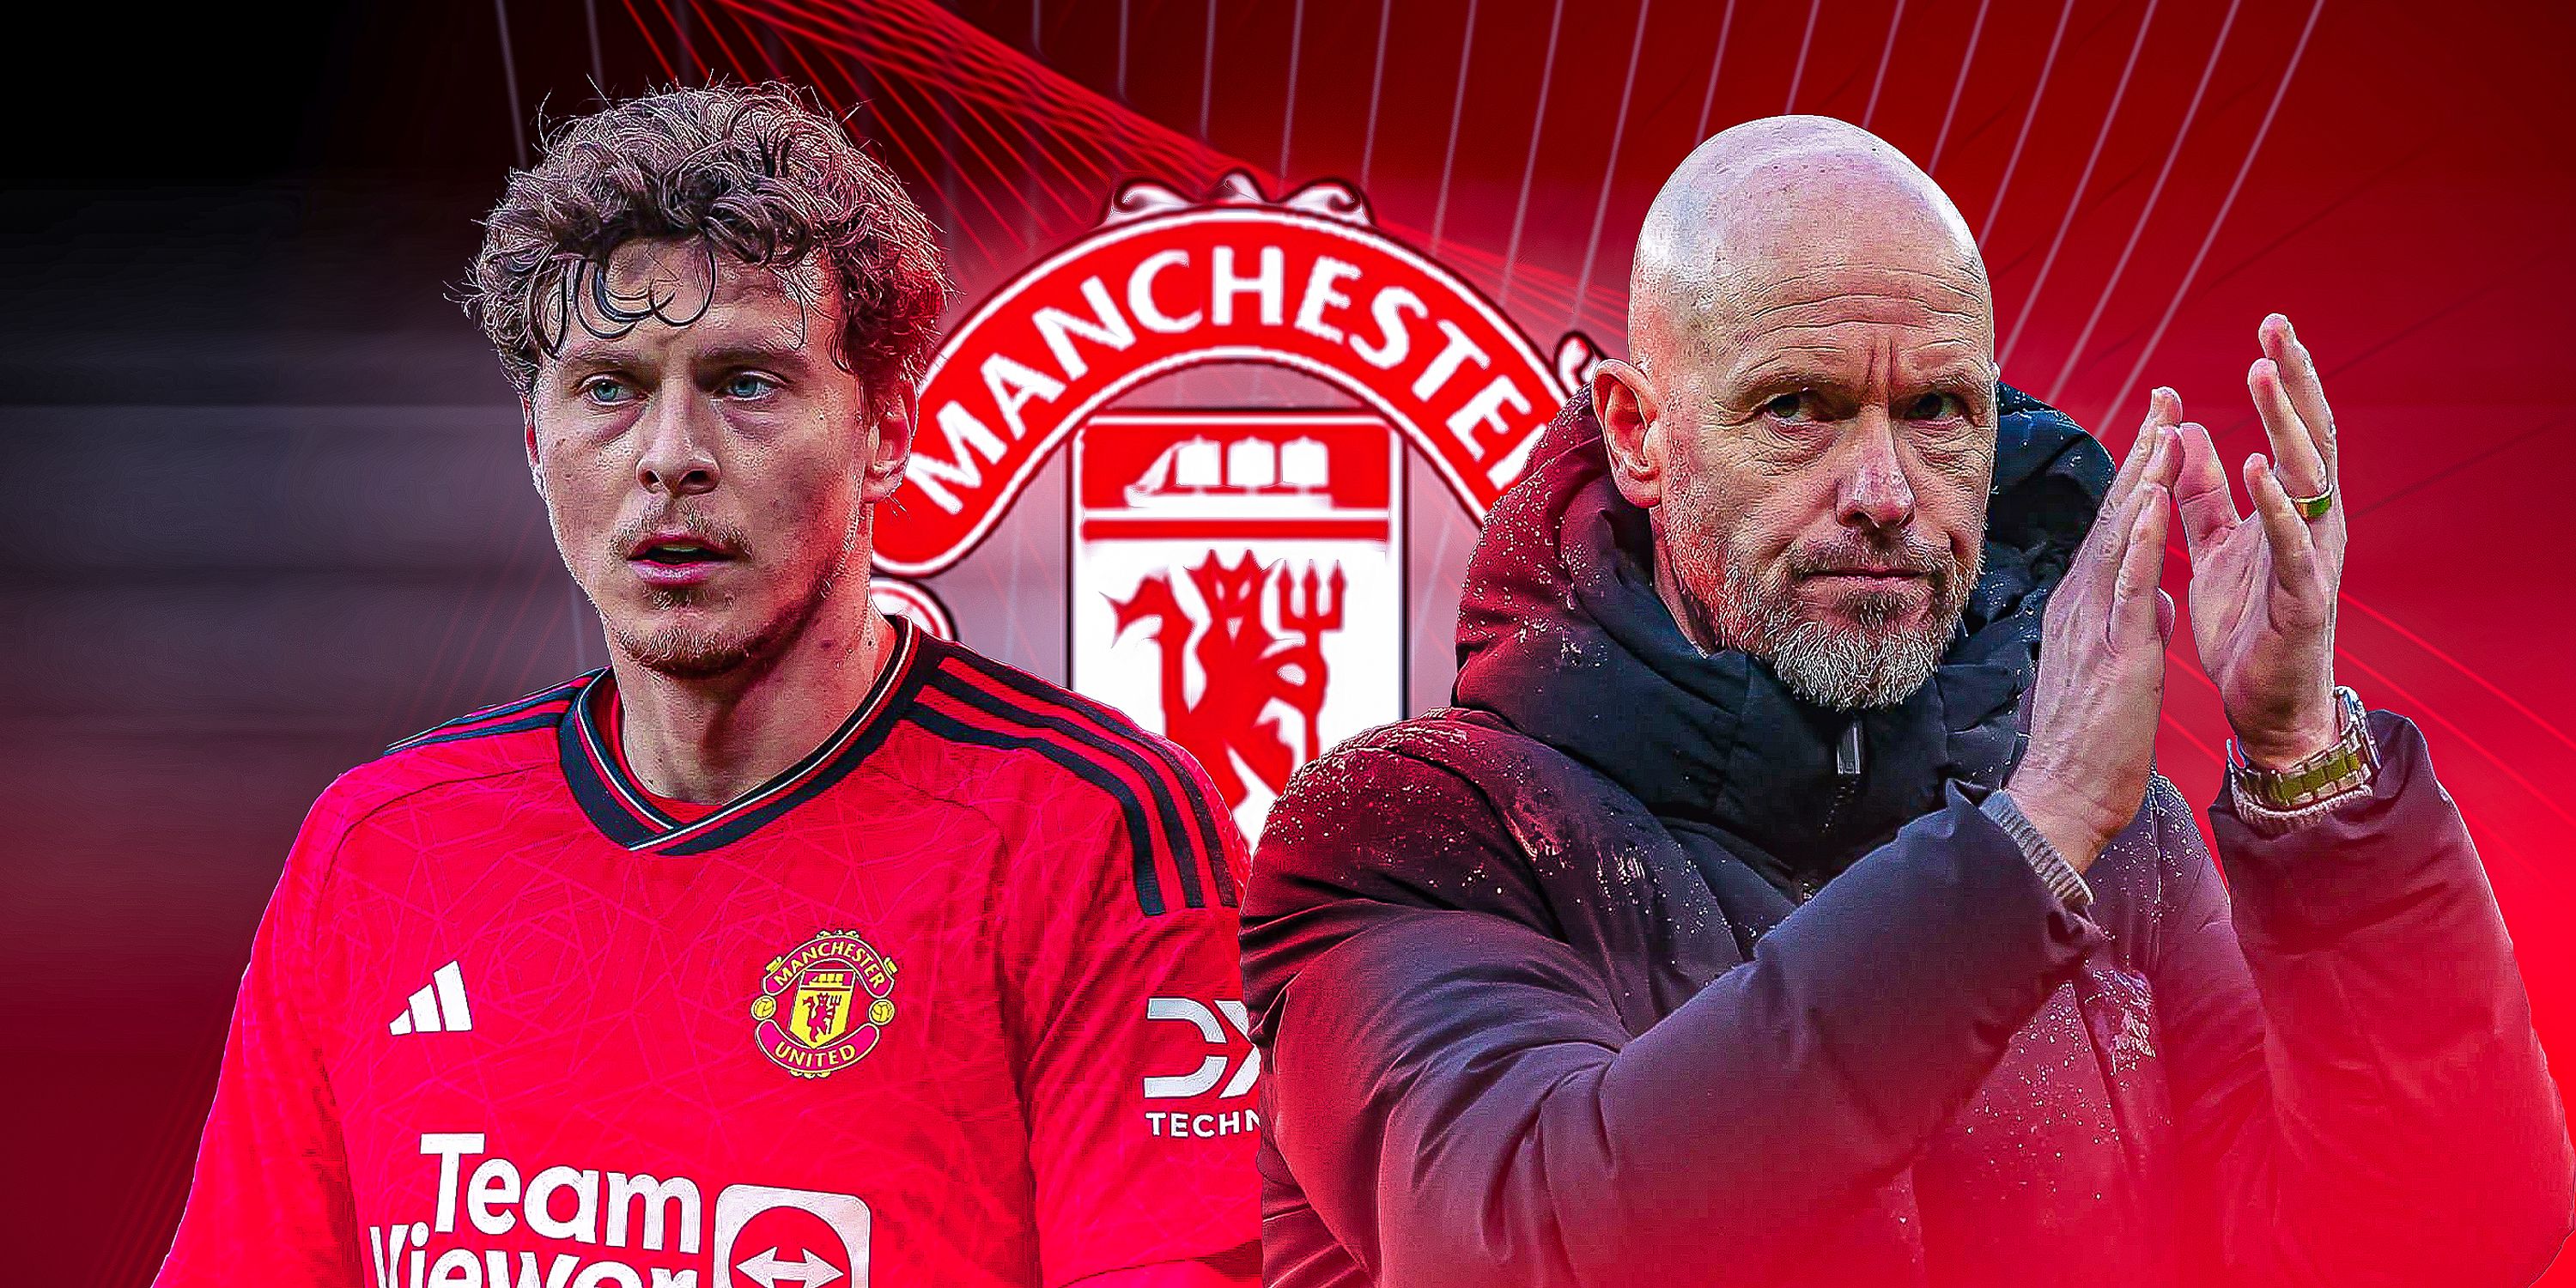 Manchester United defender Victor Lindelof in action and boss Erik ten Hag applauding supporters